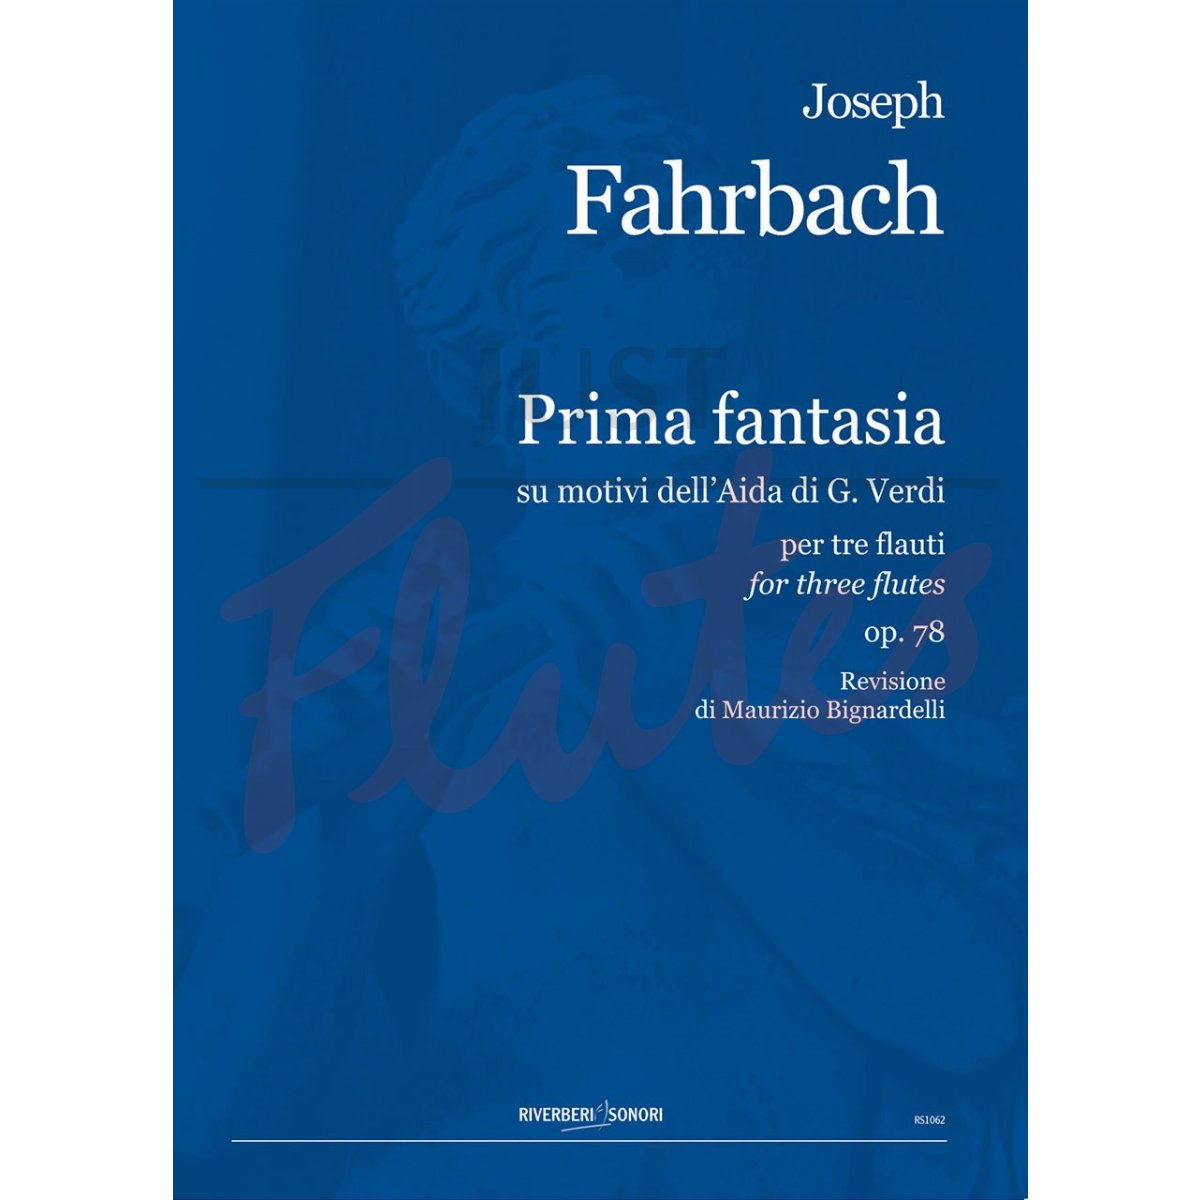 First Fantasia on Themes from Verdi's Aida for Three Flutes